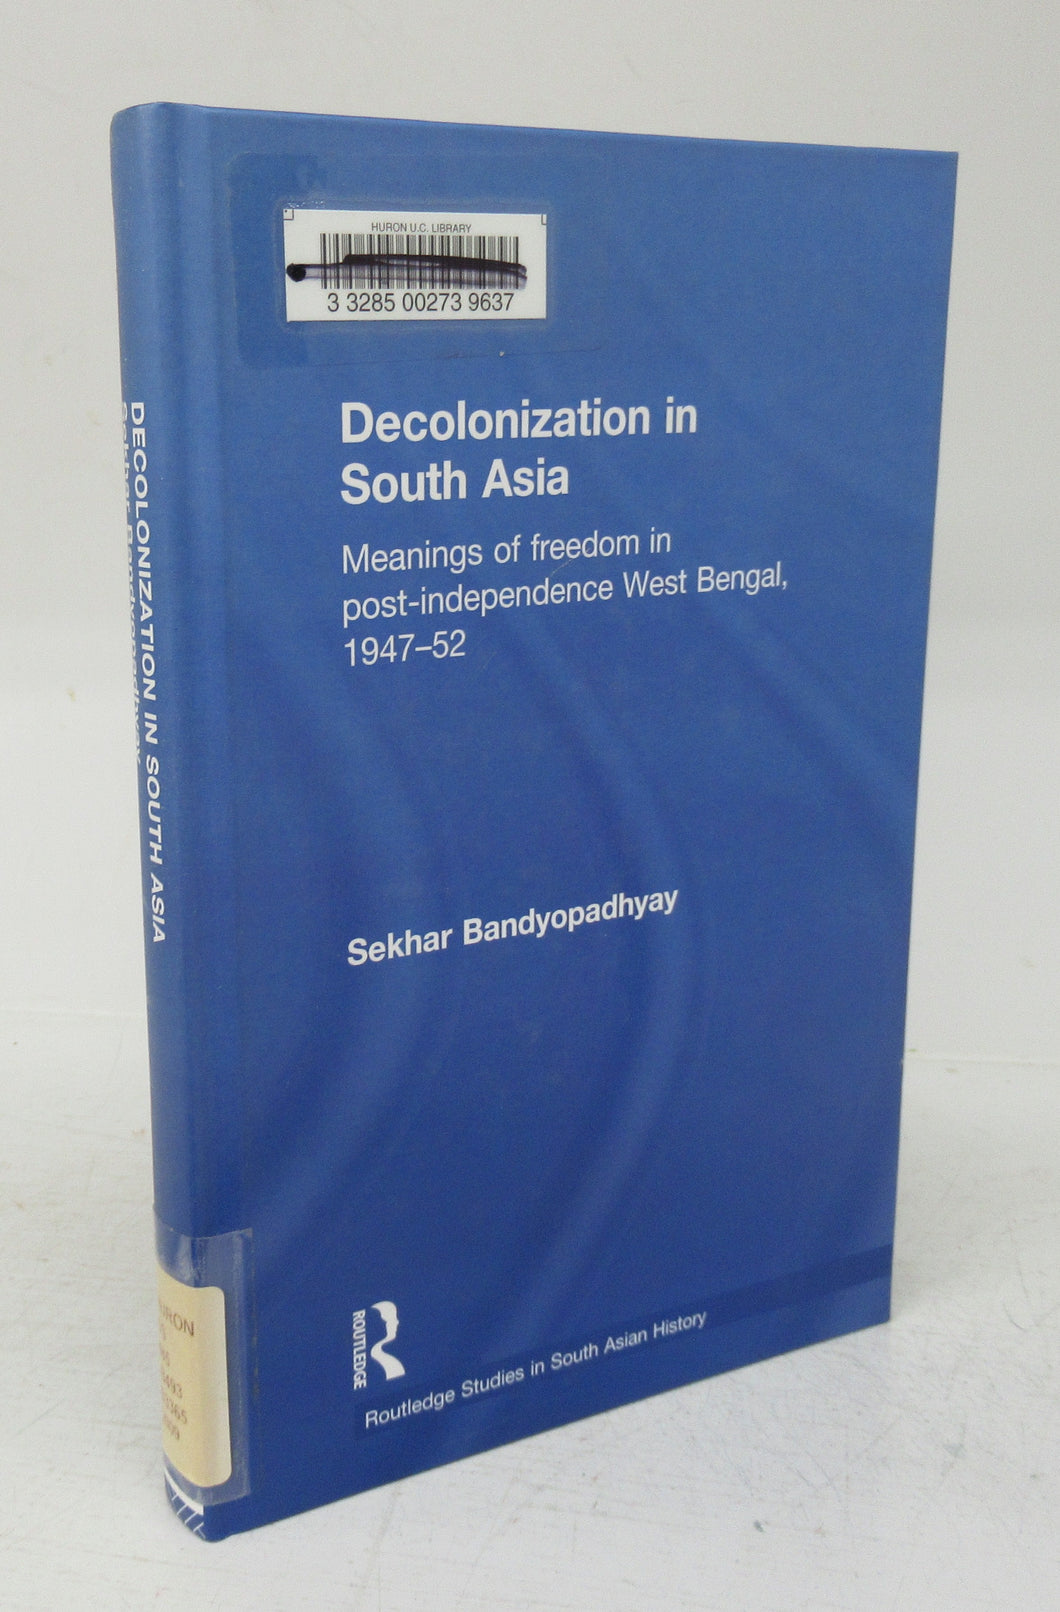 Decolonization in South Asia: Meanings of freedom in post-independence West Bengal, 1947-52